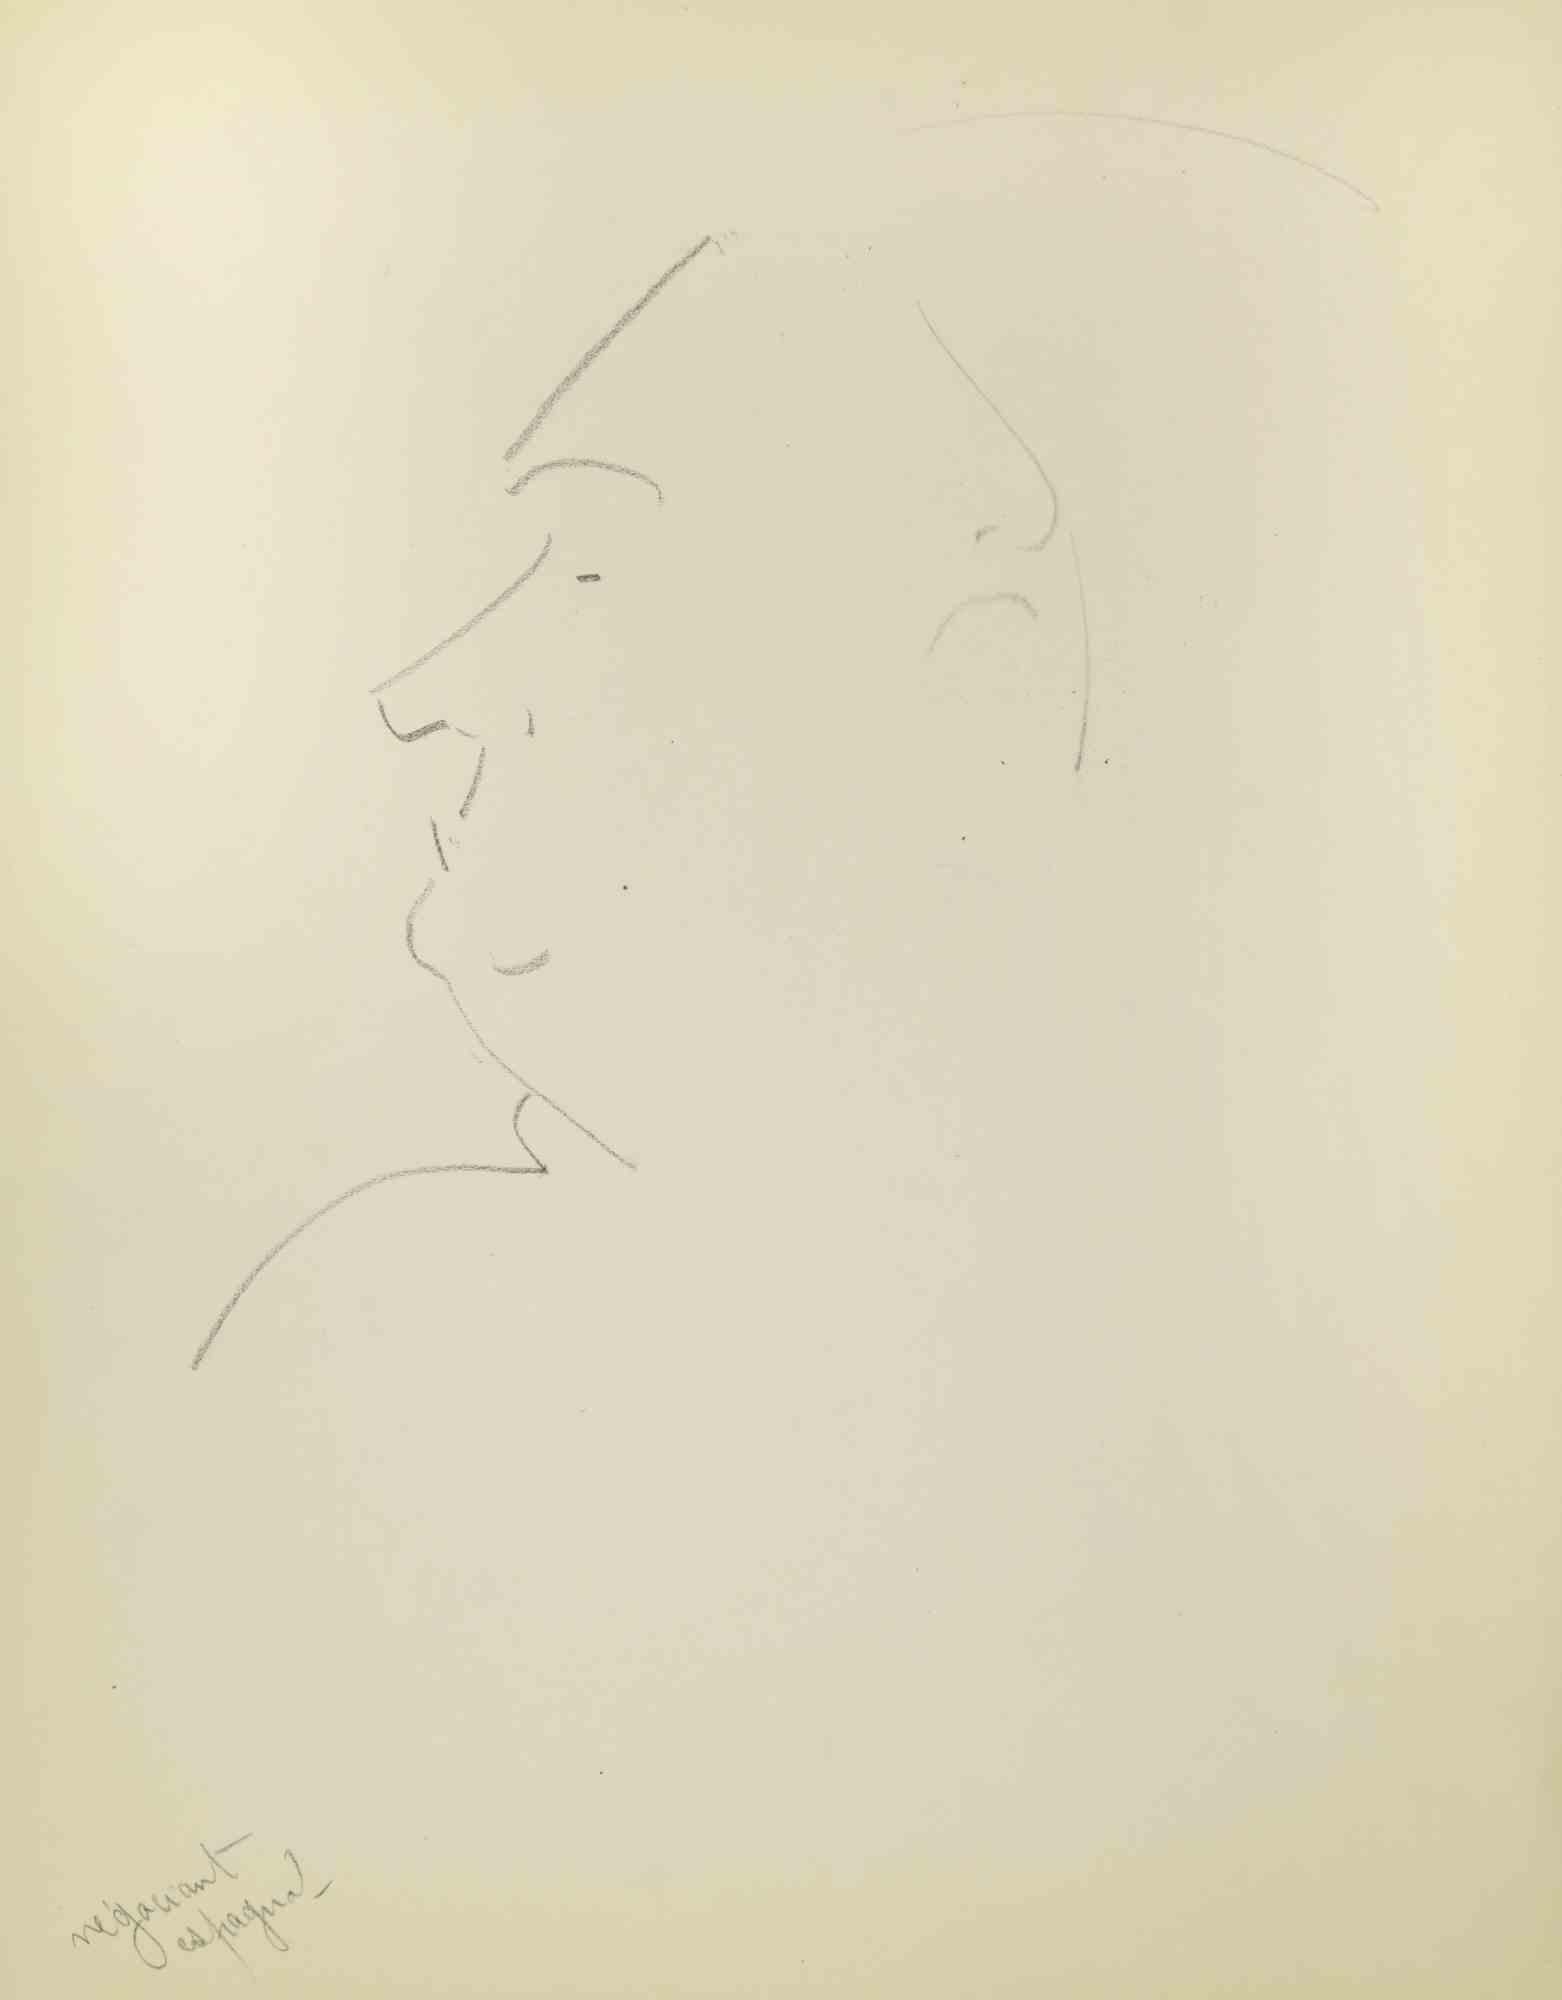 Sketch for a Portrait is a drawing on paper realized in the Mid-20th Century by Flor David.

Pencil on Cremy-colored paper.

Good conditions.

Flor David (1891-1958) ): pseudonym of David Florence. Pastel painter. He was a pupil of Desirè Lucas. He